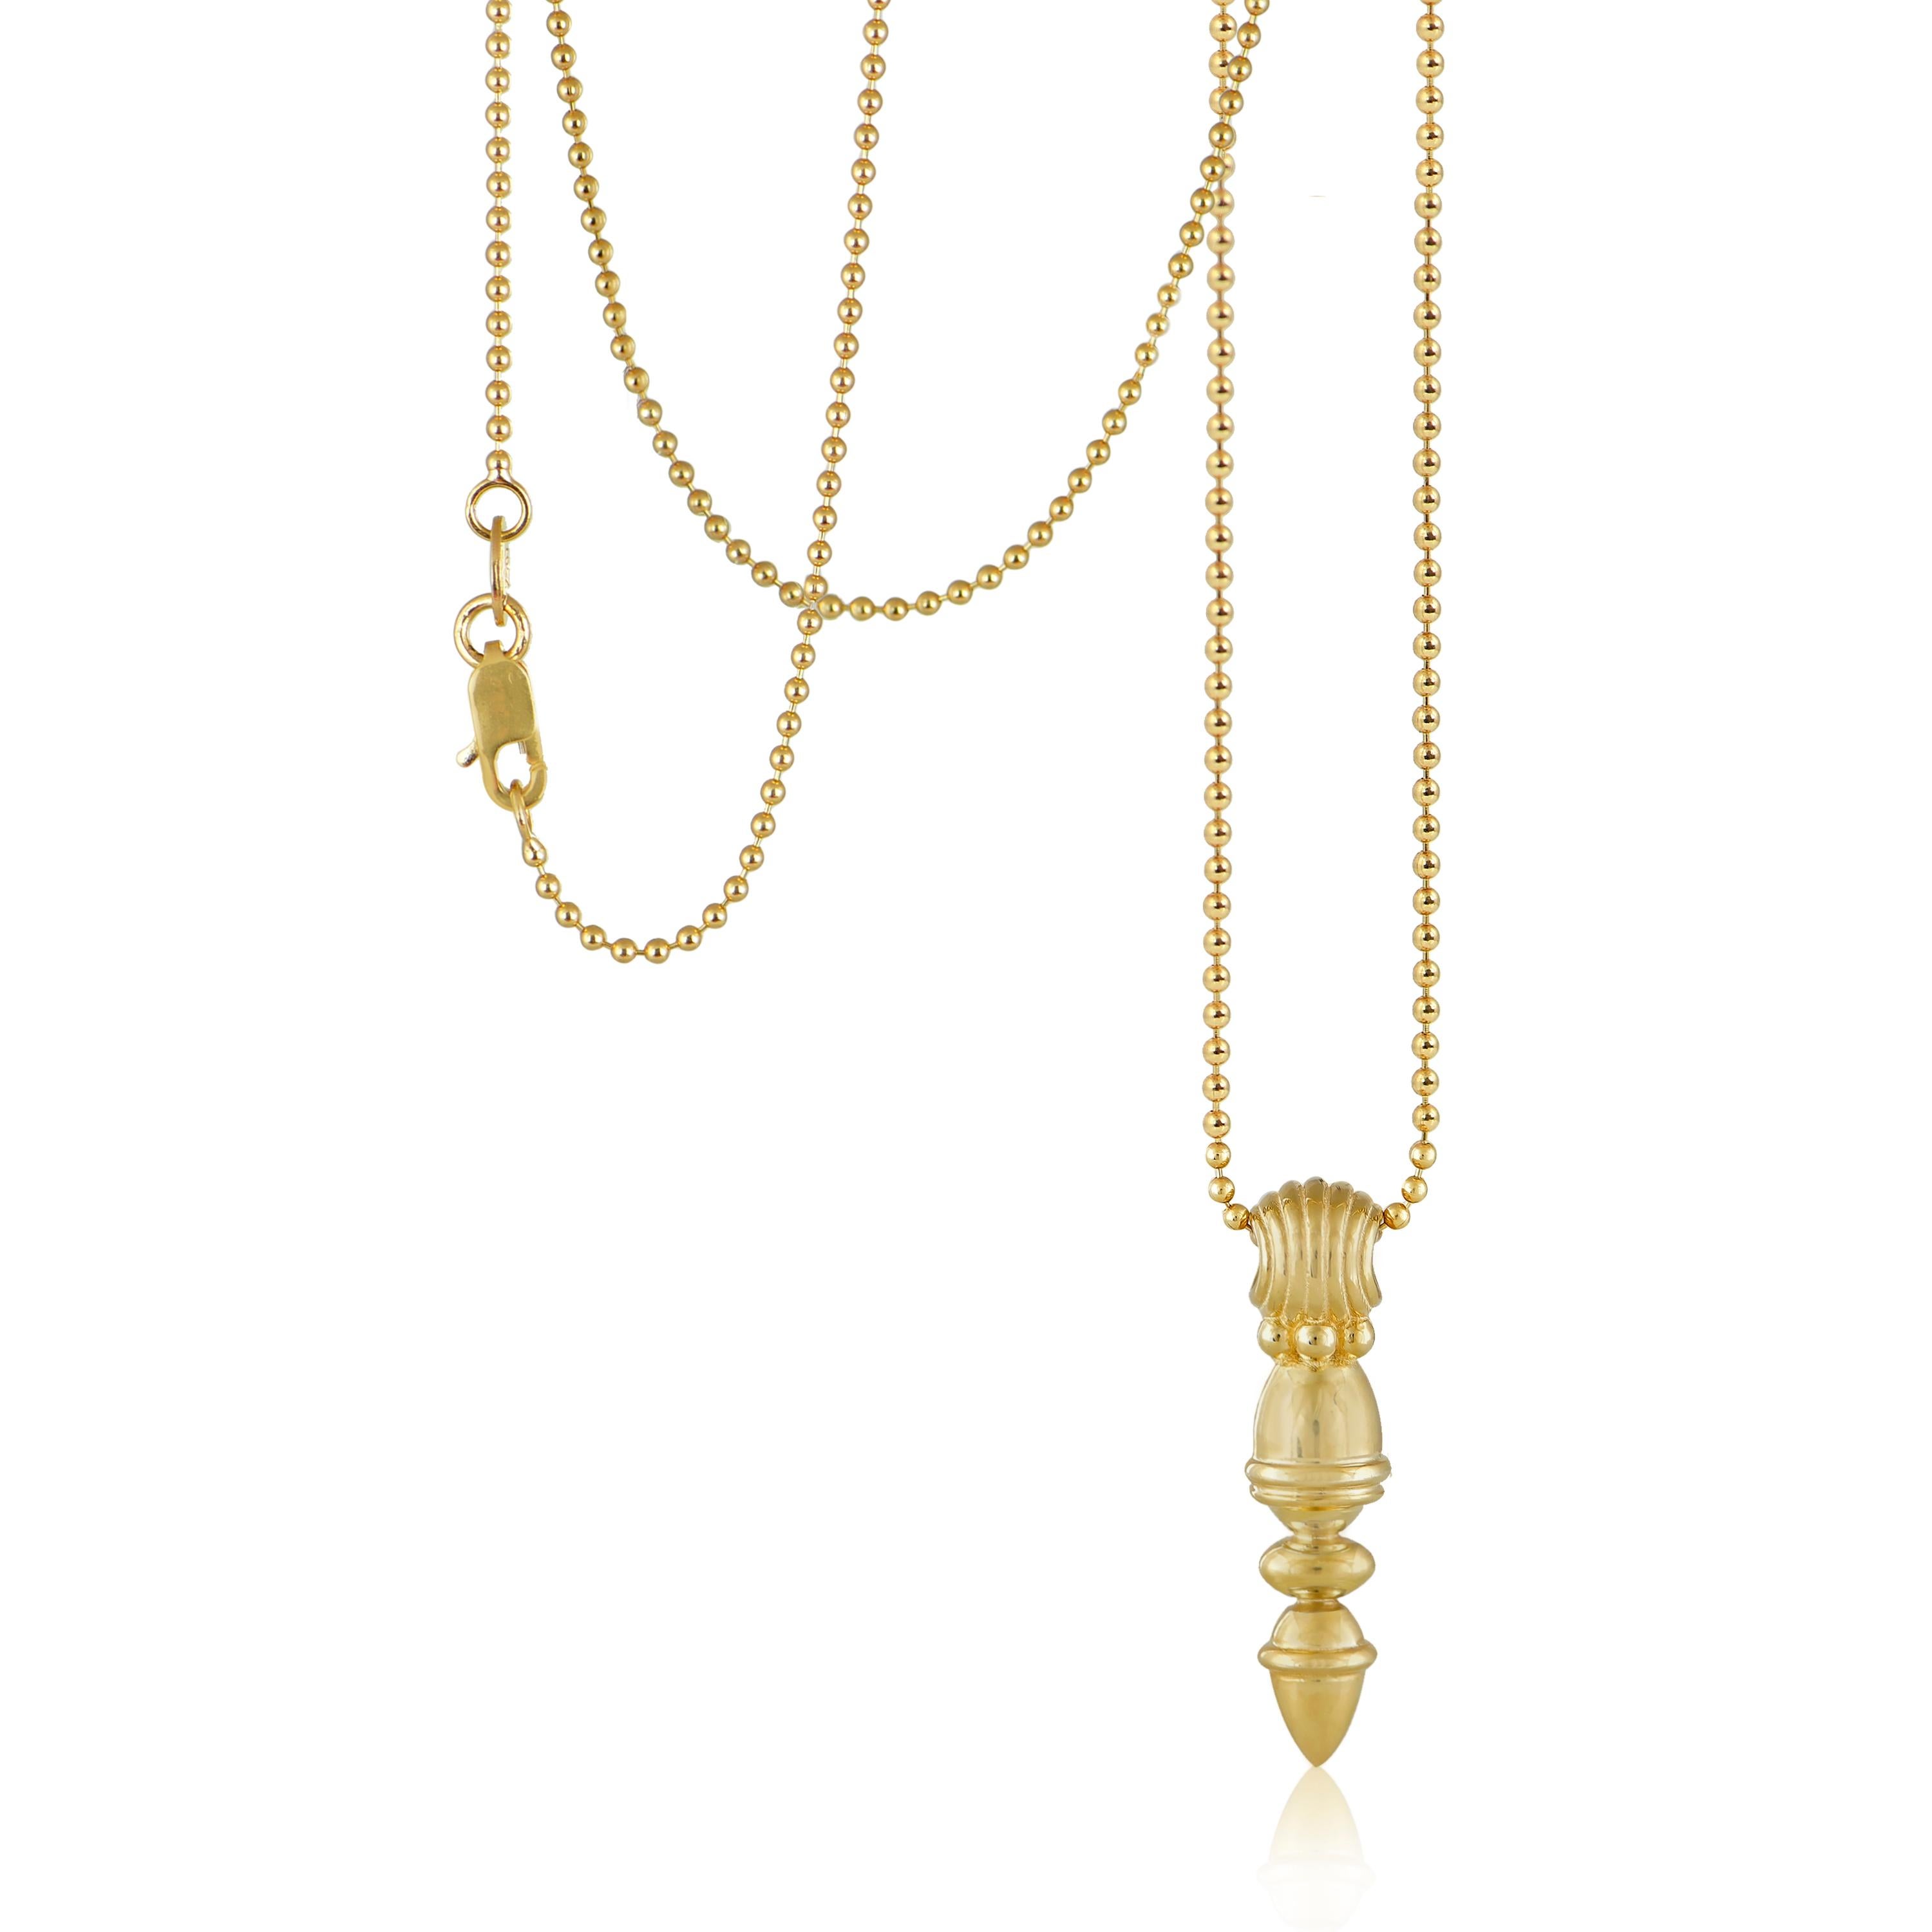 Designer: Alexia Gryllaki

Dimensions: motif L27x6 mm, chain 450mm
Weight: approximately 7.9g (inc. chain) 
Barcode: NEX3012


Totem pendant in 18 karat yellow gold with a 450mm ball-chain that can be transformed into an earring, by hanging it